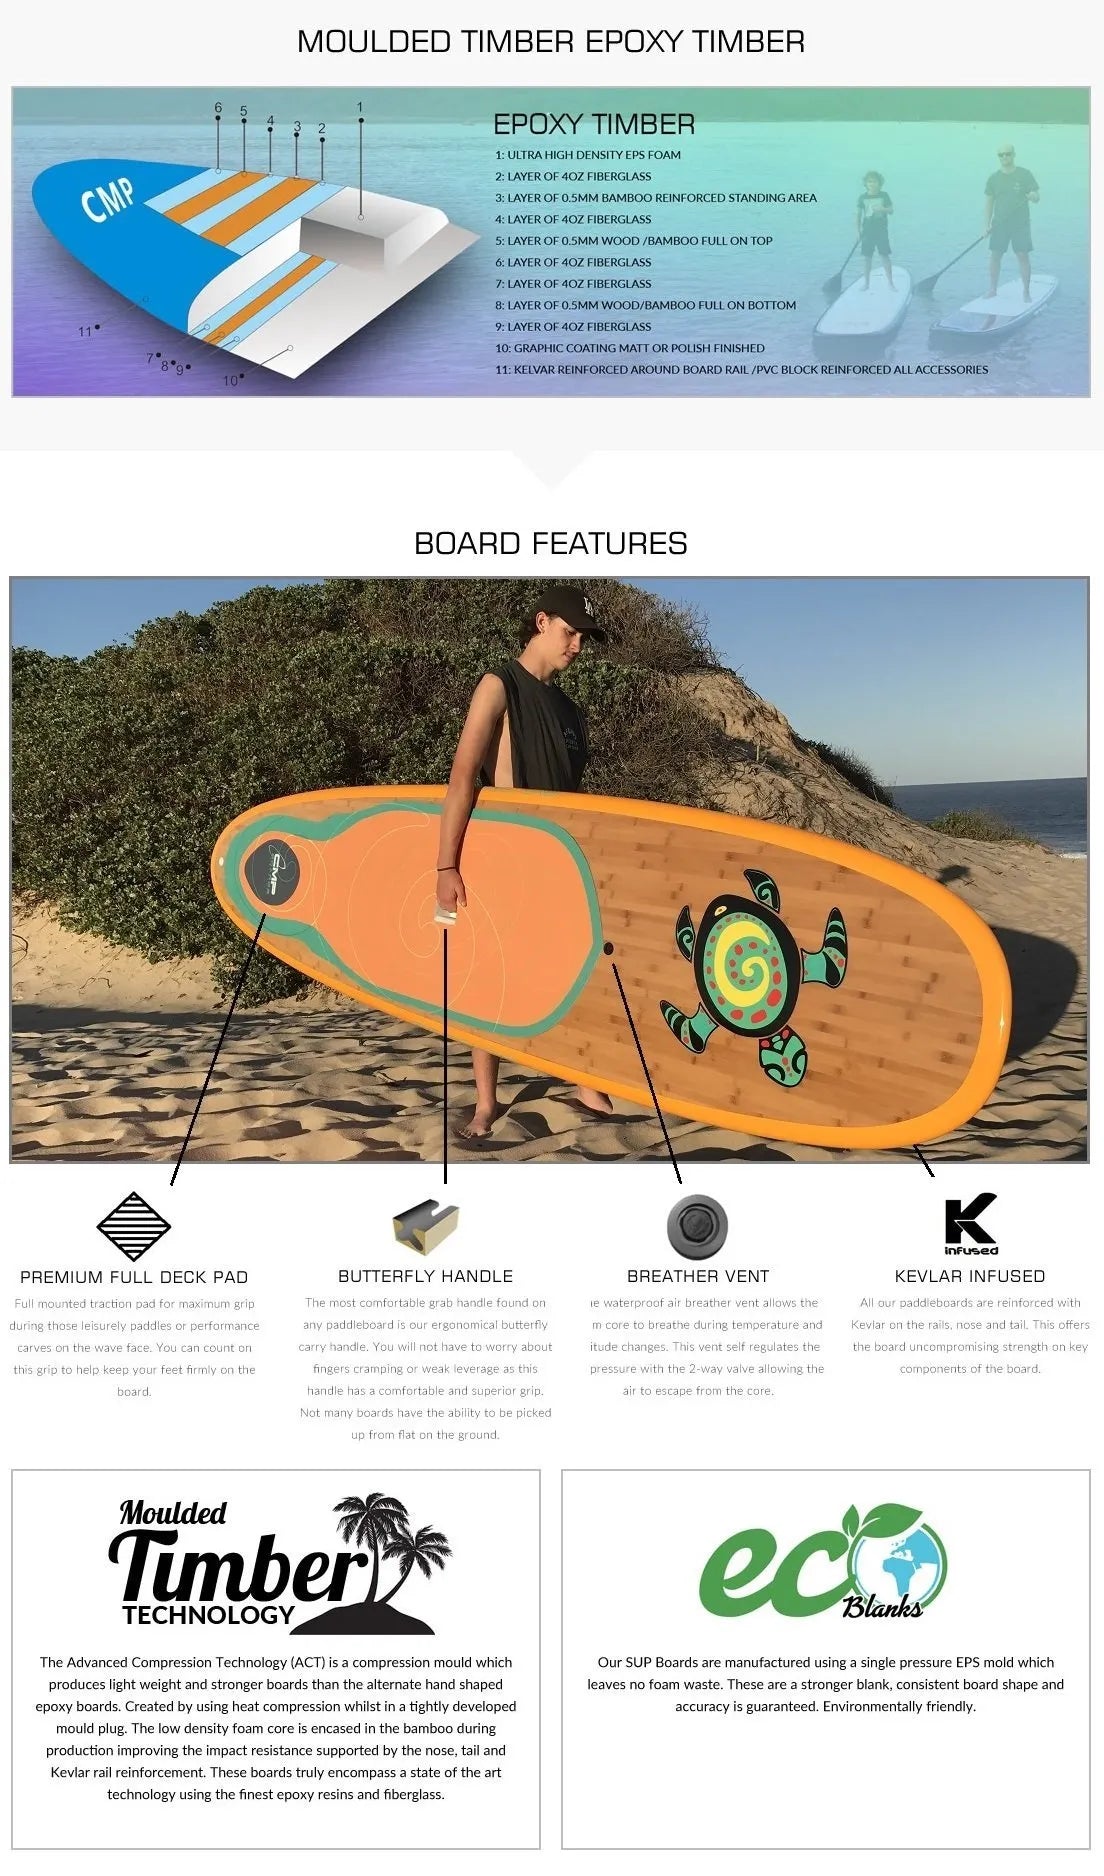 CMP Cruiser Bamboo Turtle SUP features and construction